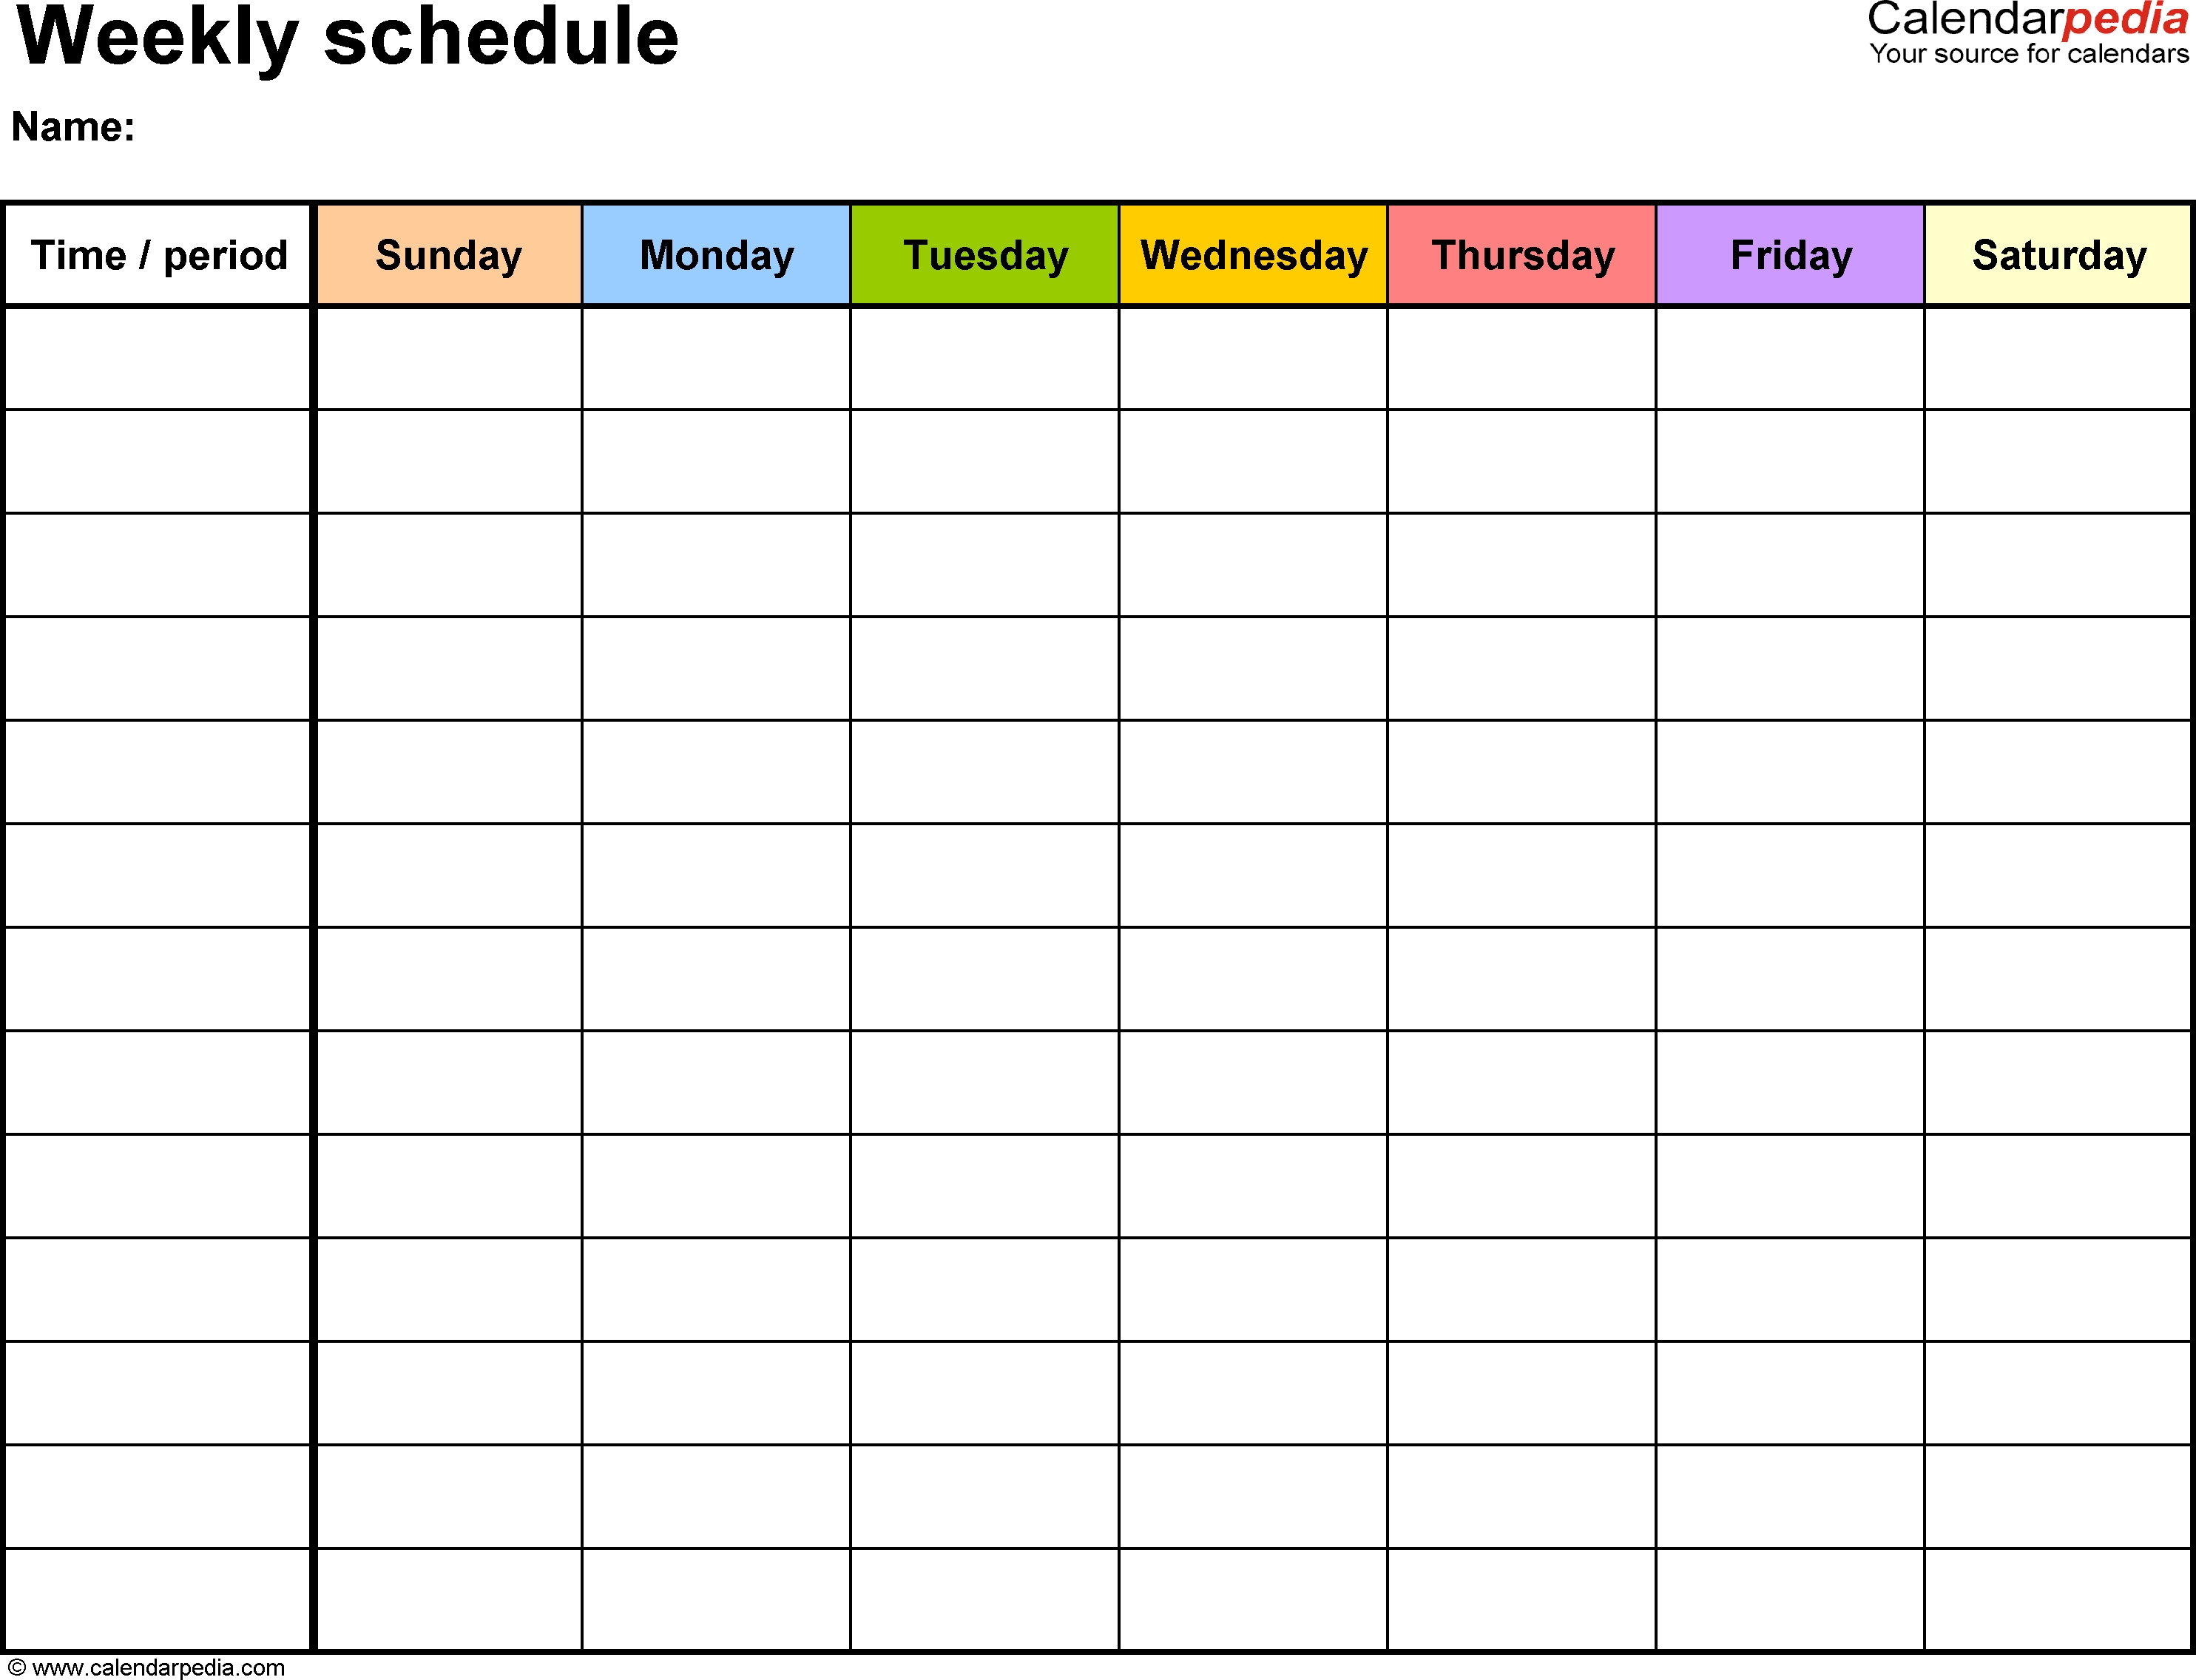 Weekly Schedule Template For Word Version 13: Landscape, 1 Excel Calendar Template That Starts Week On Monday